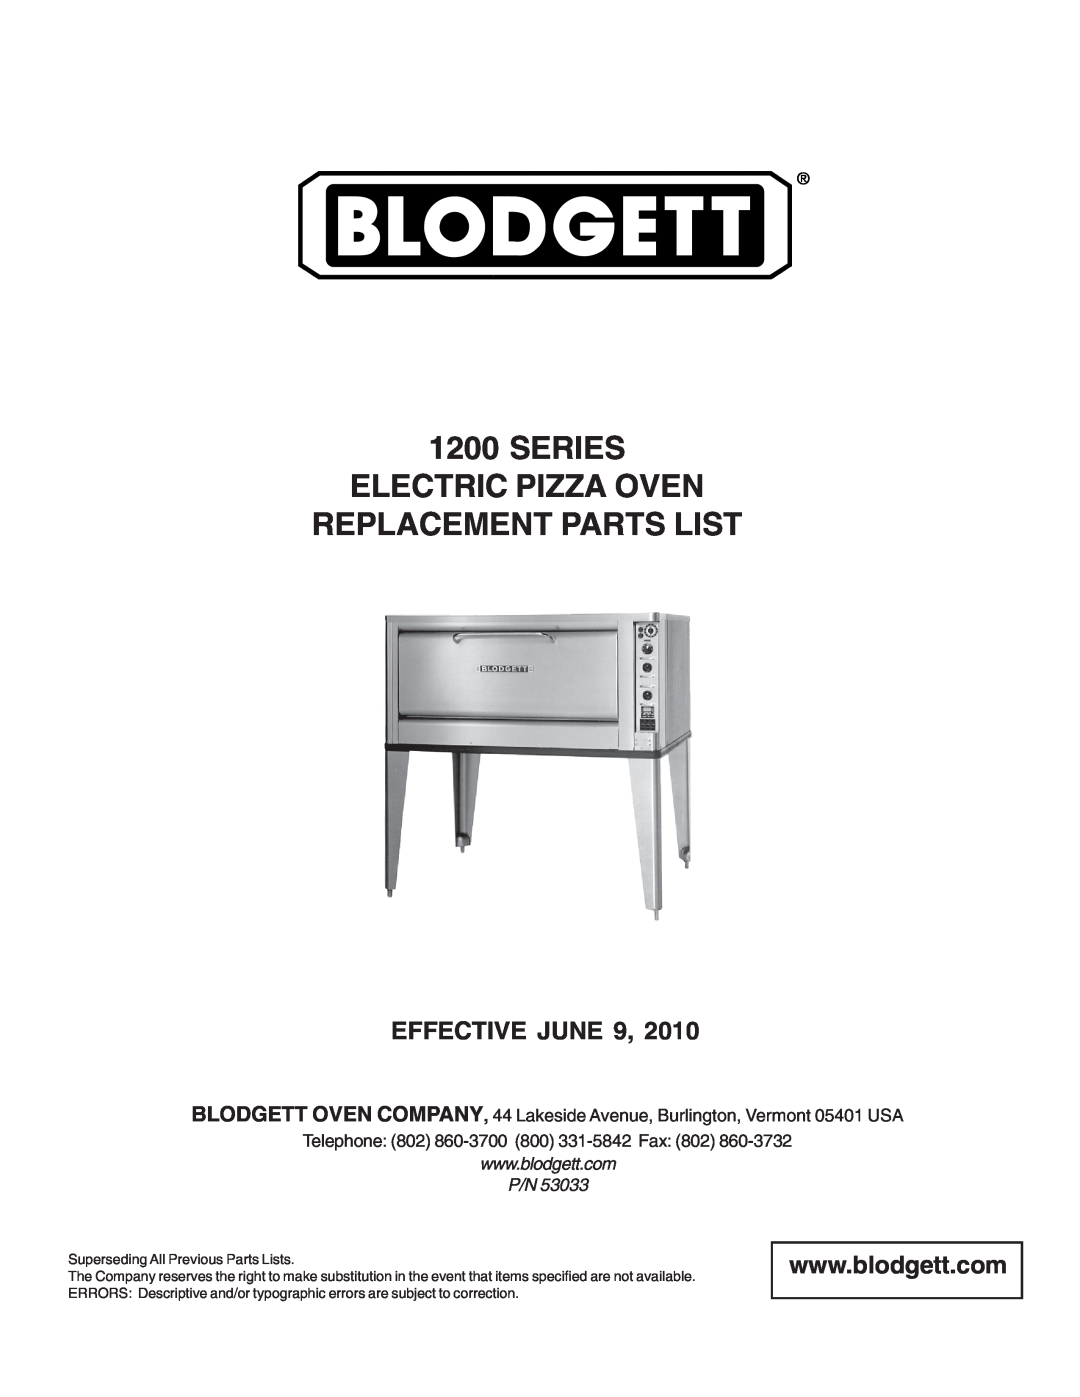 Blodgett 1200 manual Effective June, Telephone 802 860-3700800 331-5842Fax, Series Electric Pizza Oven 